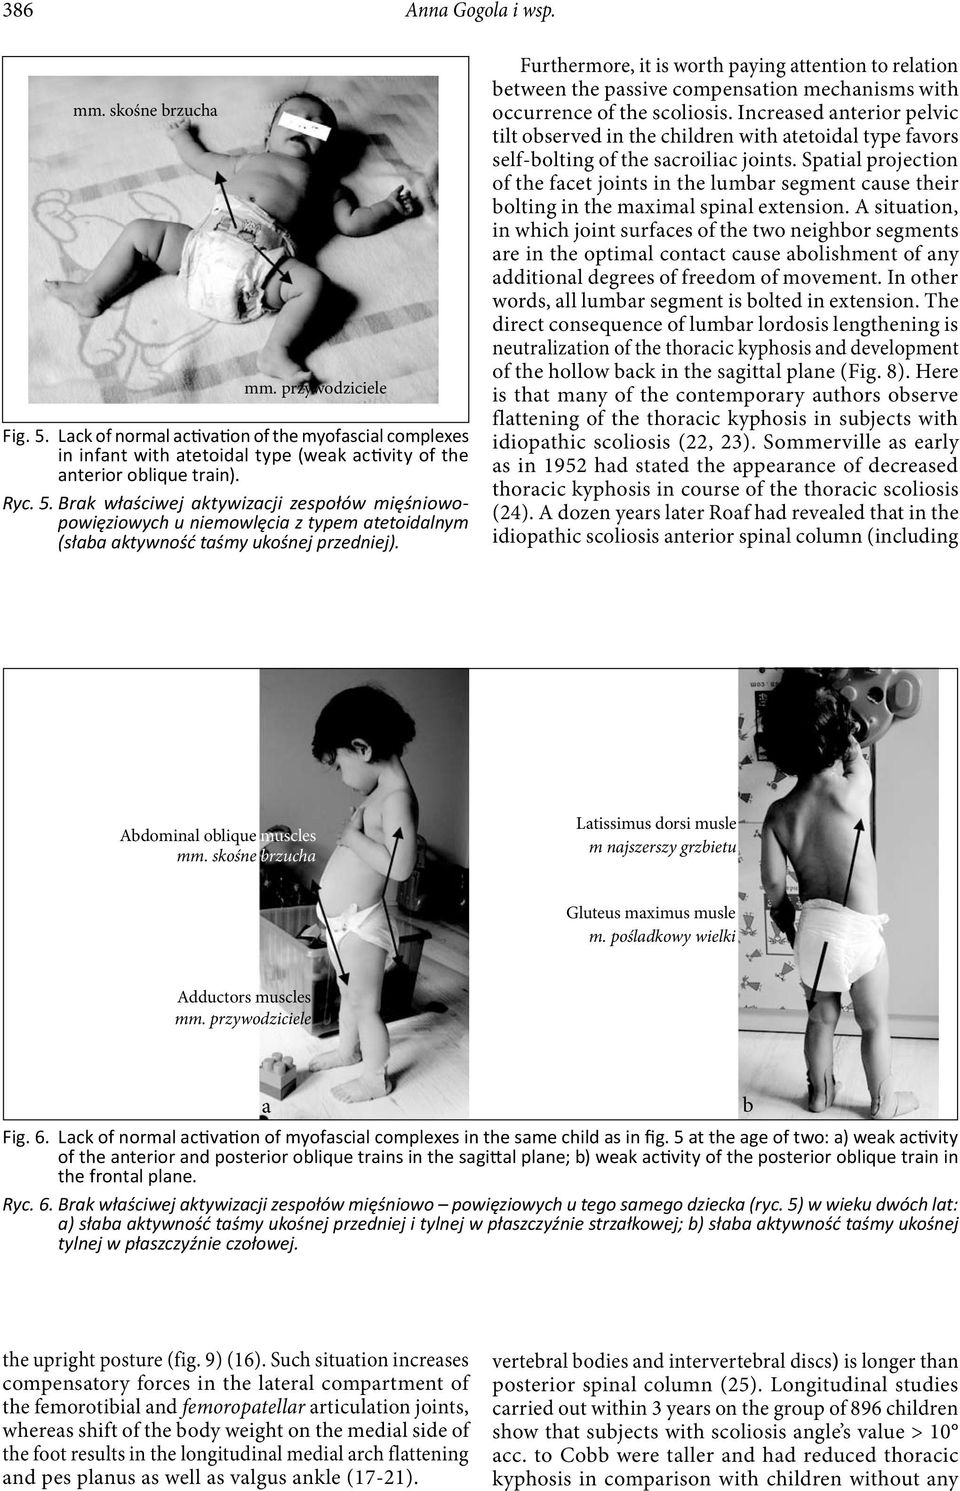 Incresed nterior pelvic tilt oserved in the children with tetoidl type fvors self-olting of the scroilic joints.